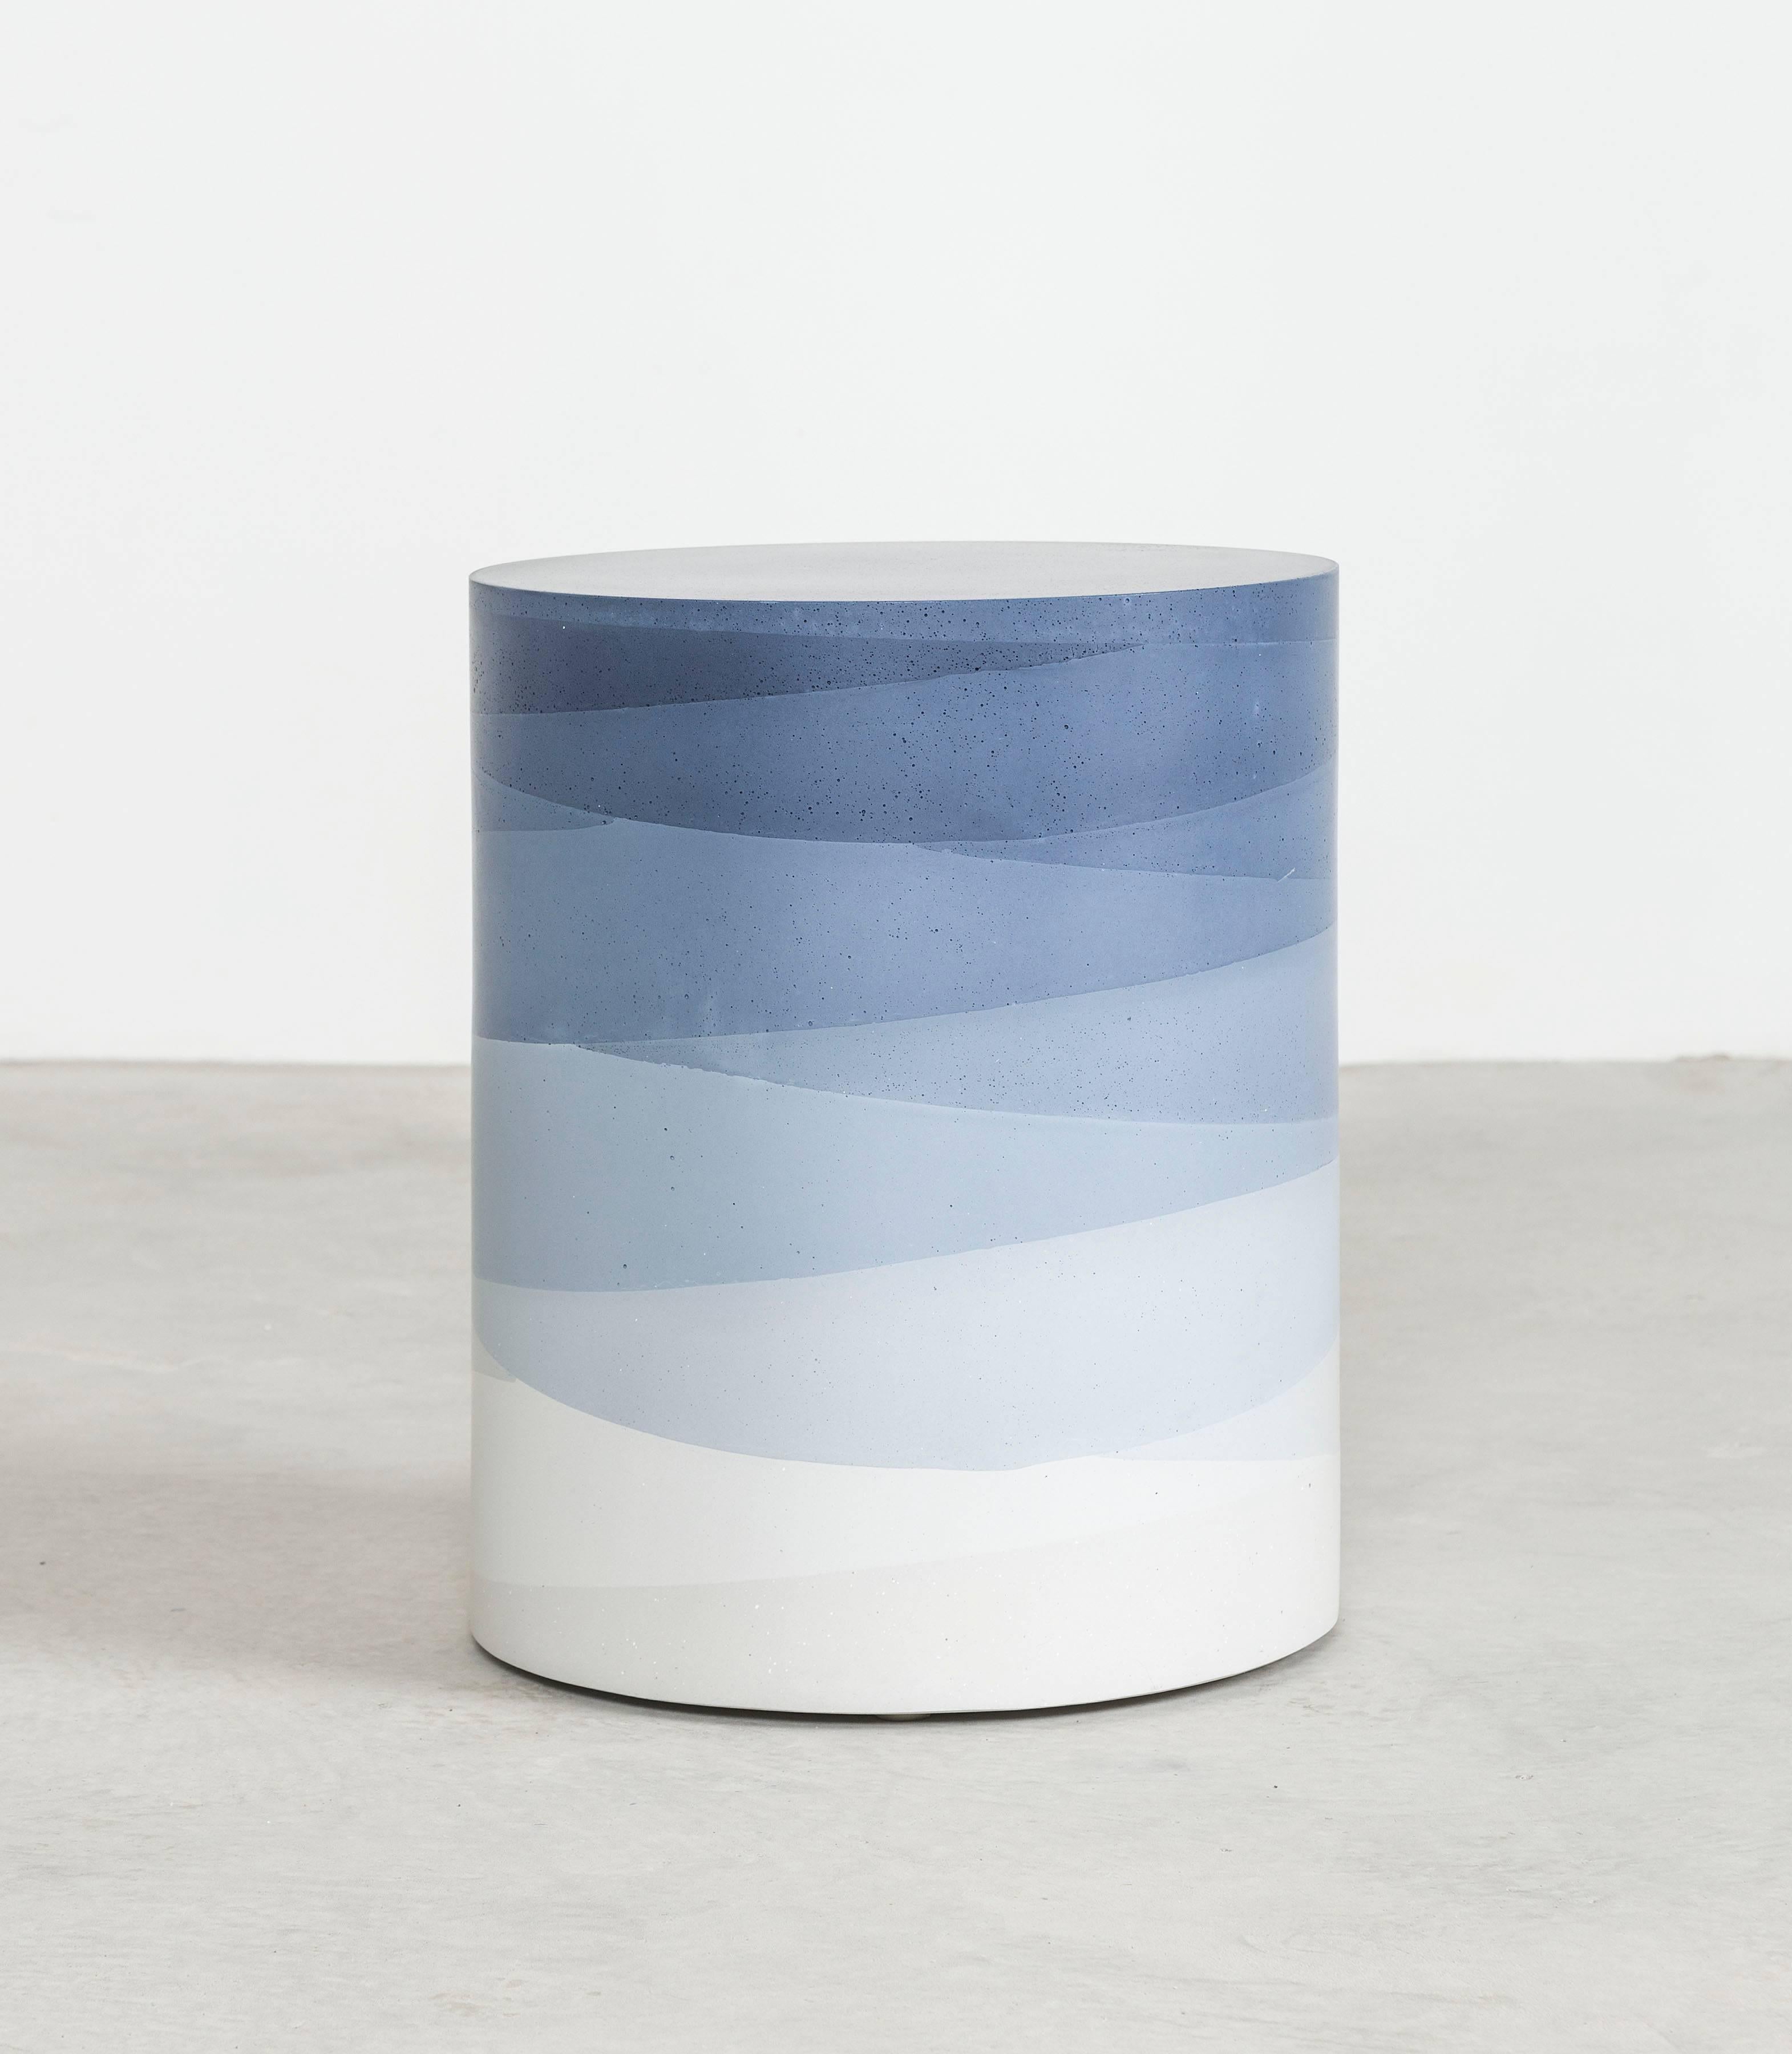 An exploration in the softness and subtly of the materials, the made-to-order drum has a hollow cavity and is cast entirely from hand-dyed cement. Poured in individual hand-dyed layers, starting from the top color indigo and fading to white, the